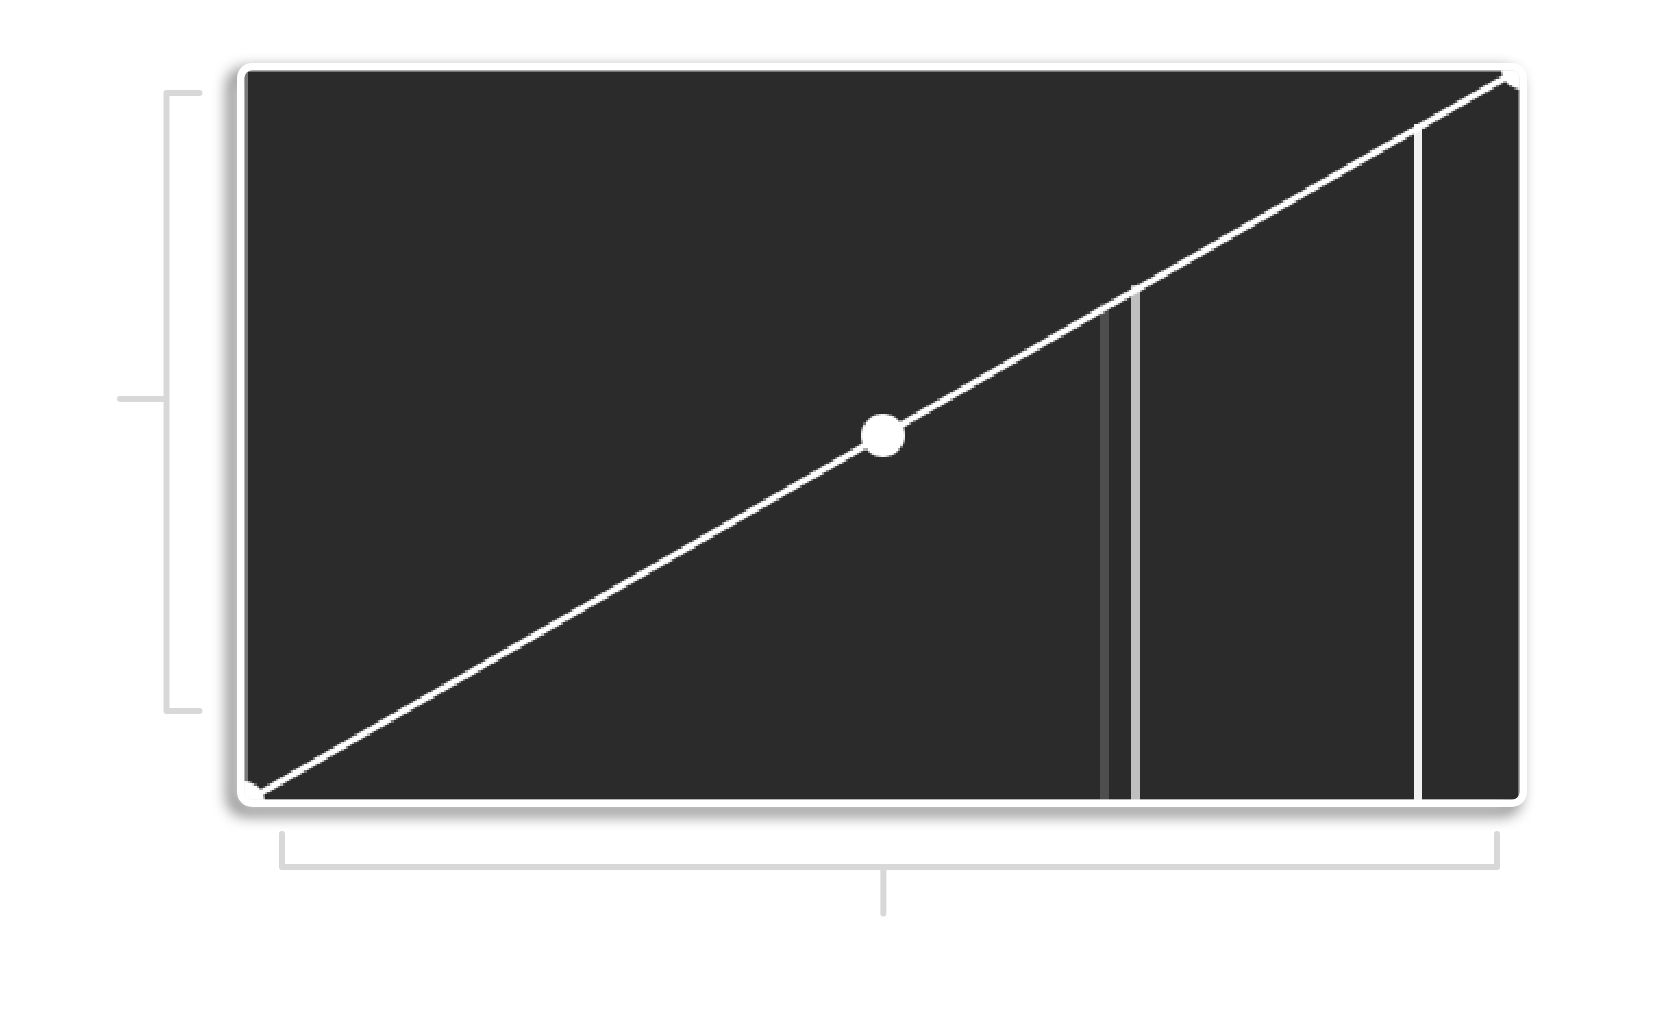 An explanation of the velocity in/out panel in the training window